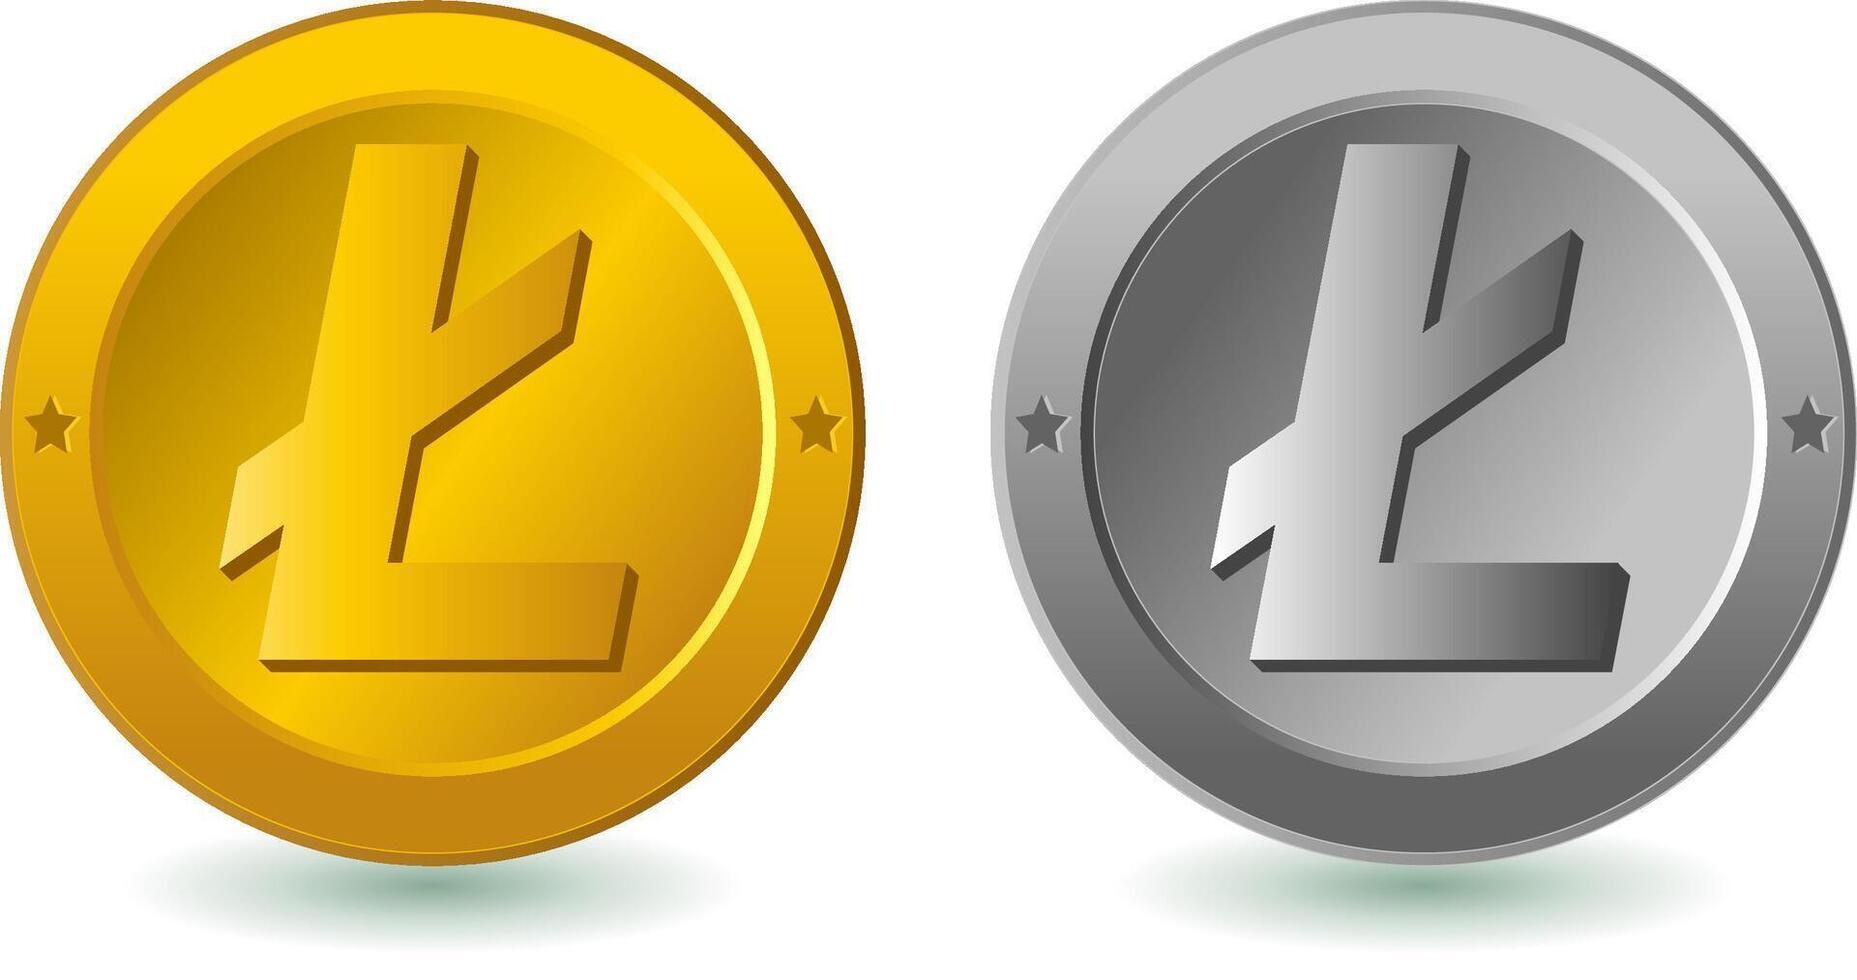 Lite coin digital currency. Gold and silver color. vector